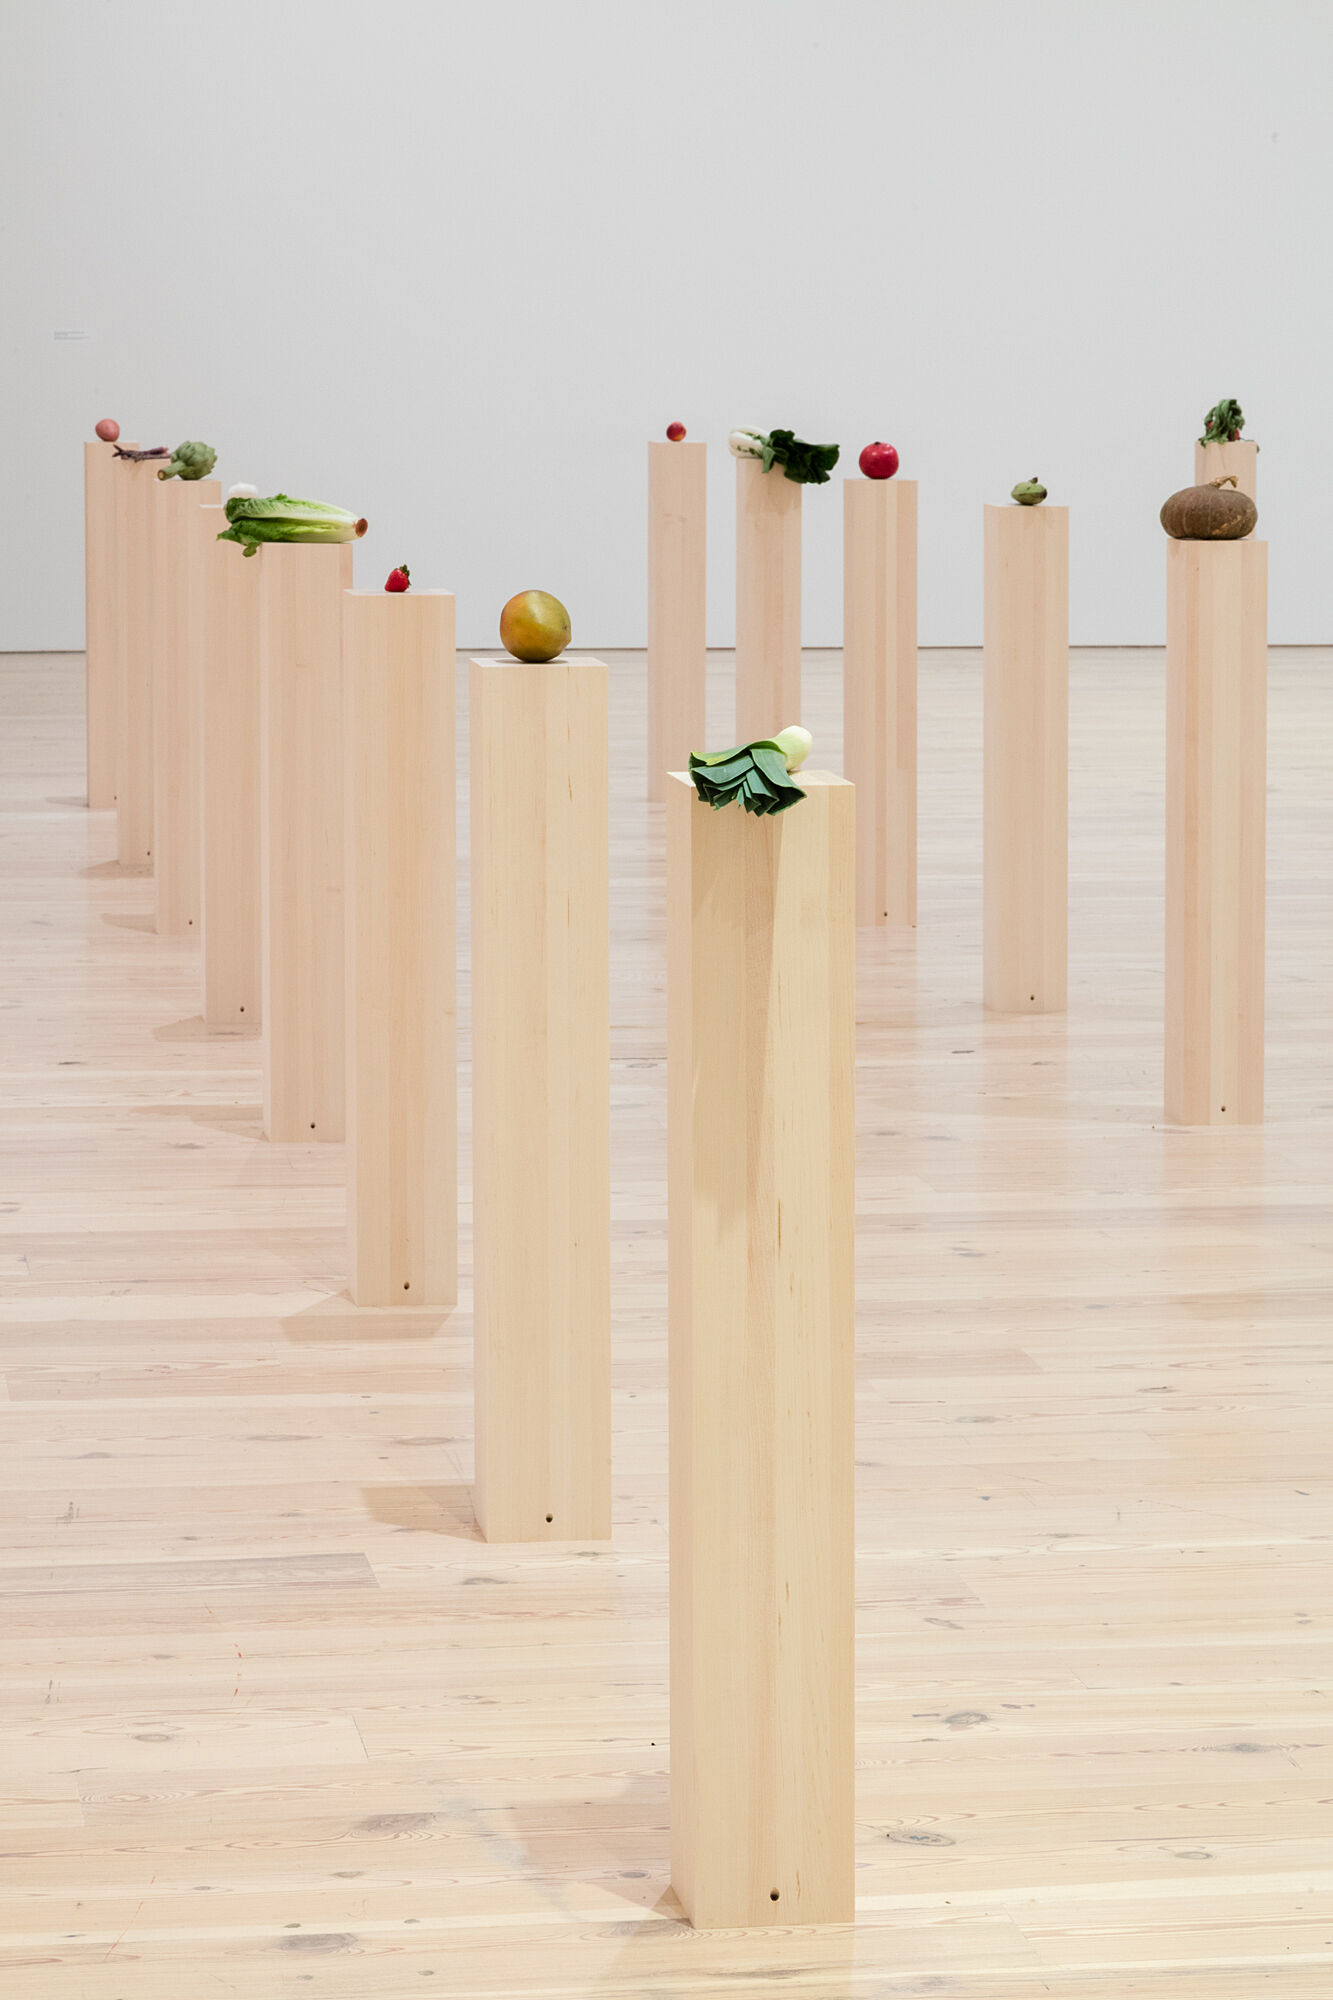 A photo of a gallery full of assorted vegetables and fruits on plinths.